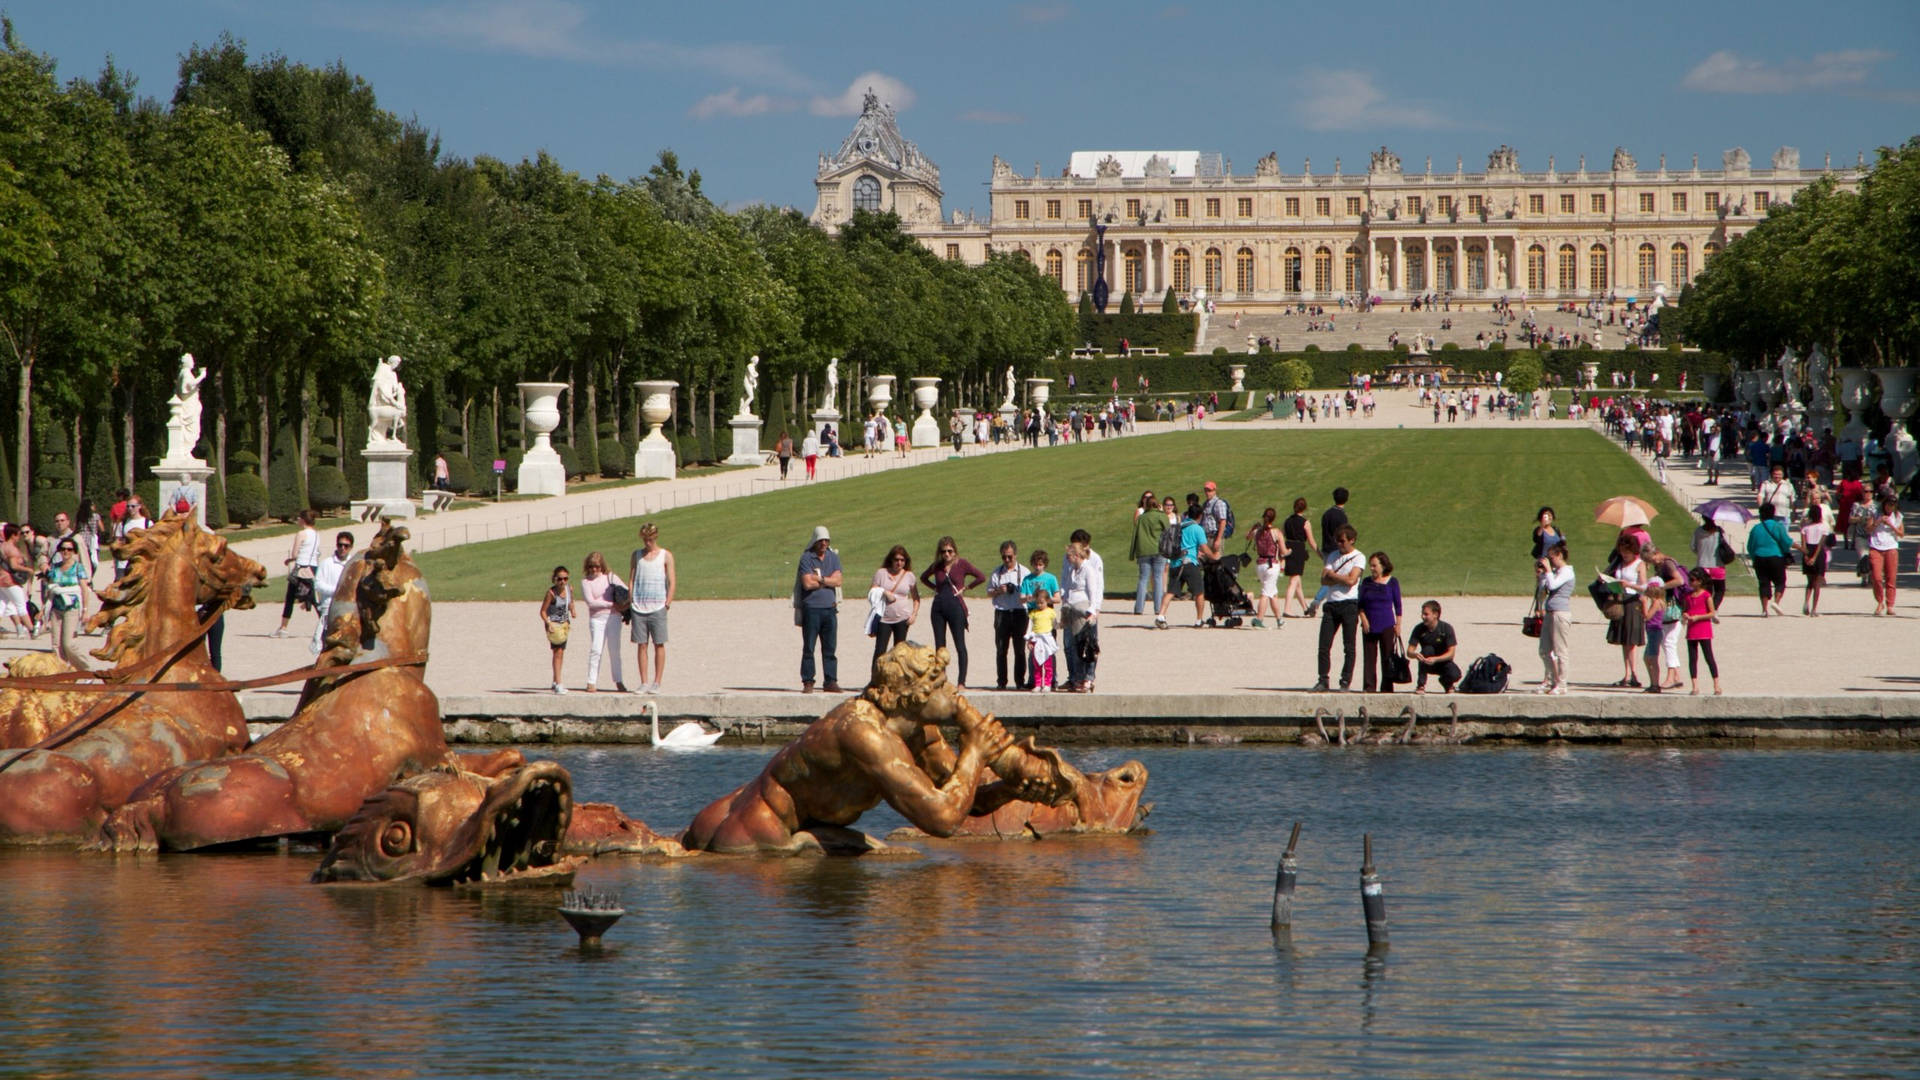 Majestic Apollo's Fountain At The Palace Of Versailles Background